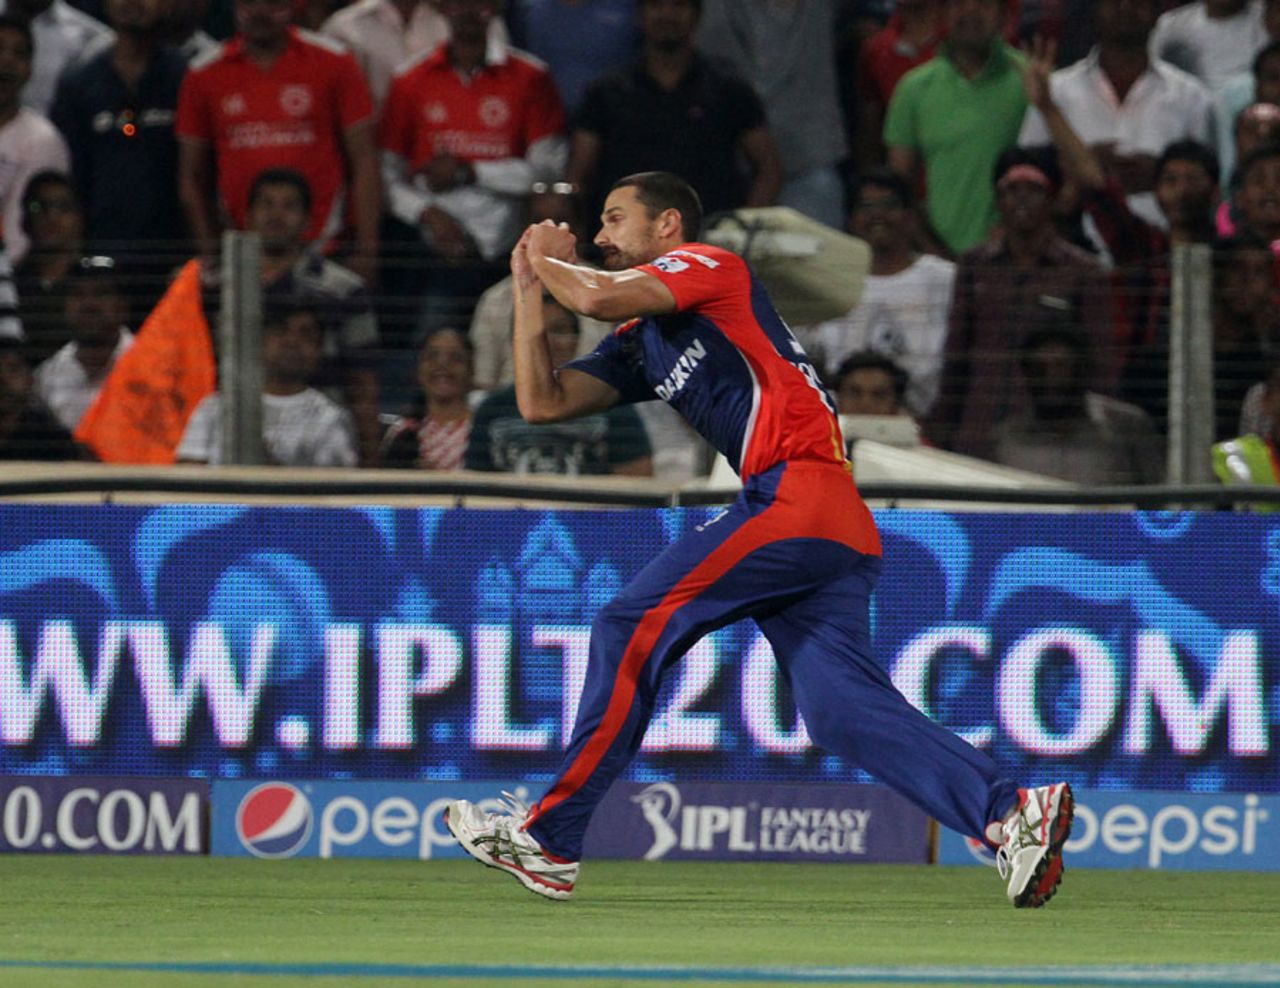 Nathan Coulter-Nile holds on to a catch from Virender Sehwag, Kings XI Punjab v Delhi Daredevils, IPL 2015, Pune, April 15, 2015